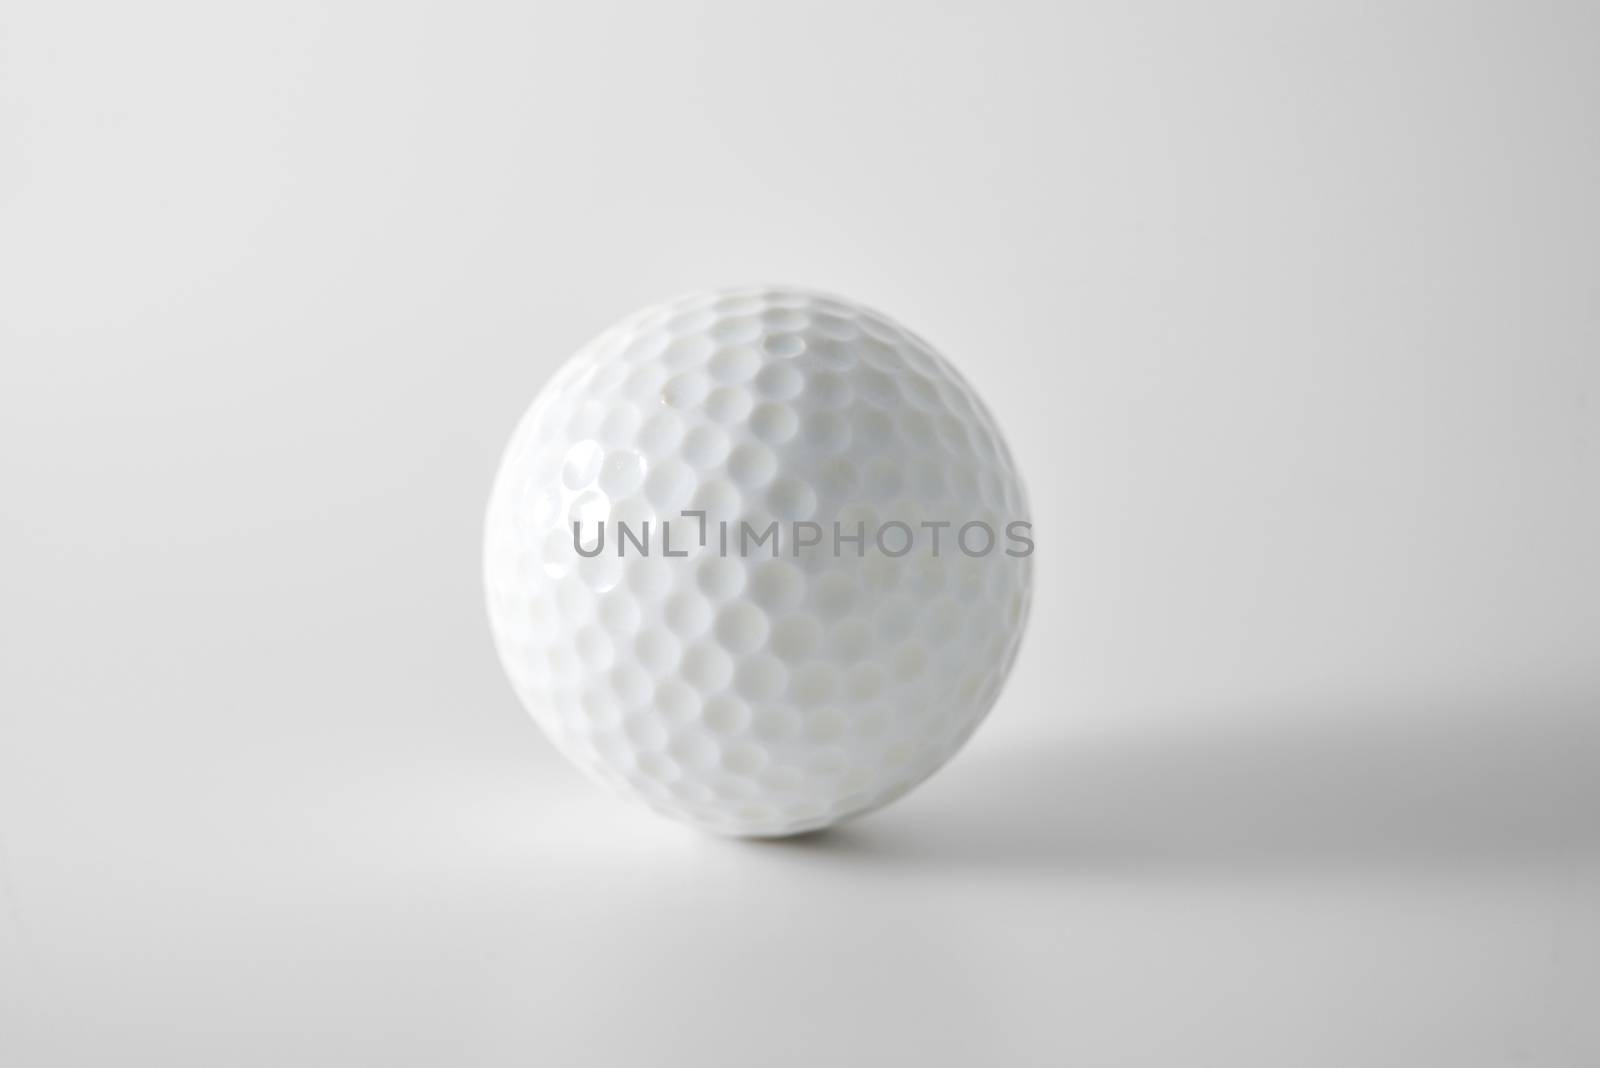 golf ball isolated on white with clipping path